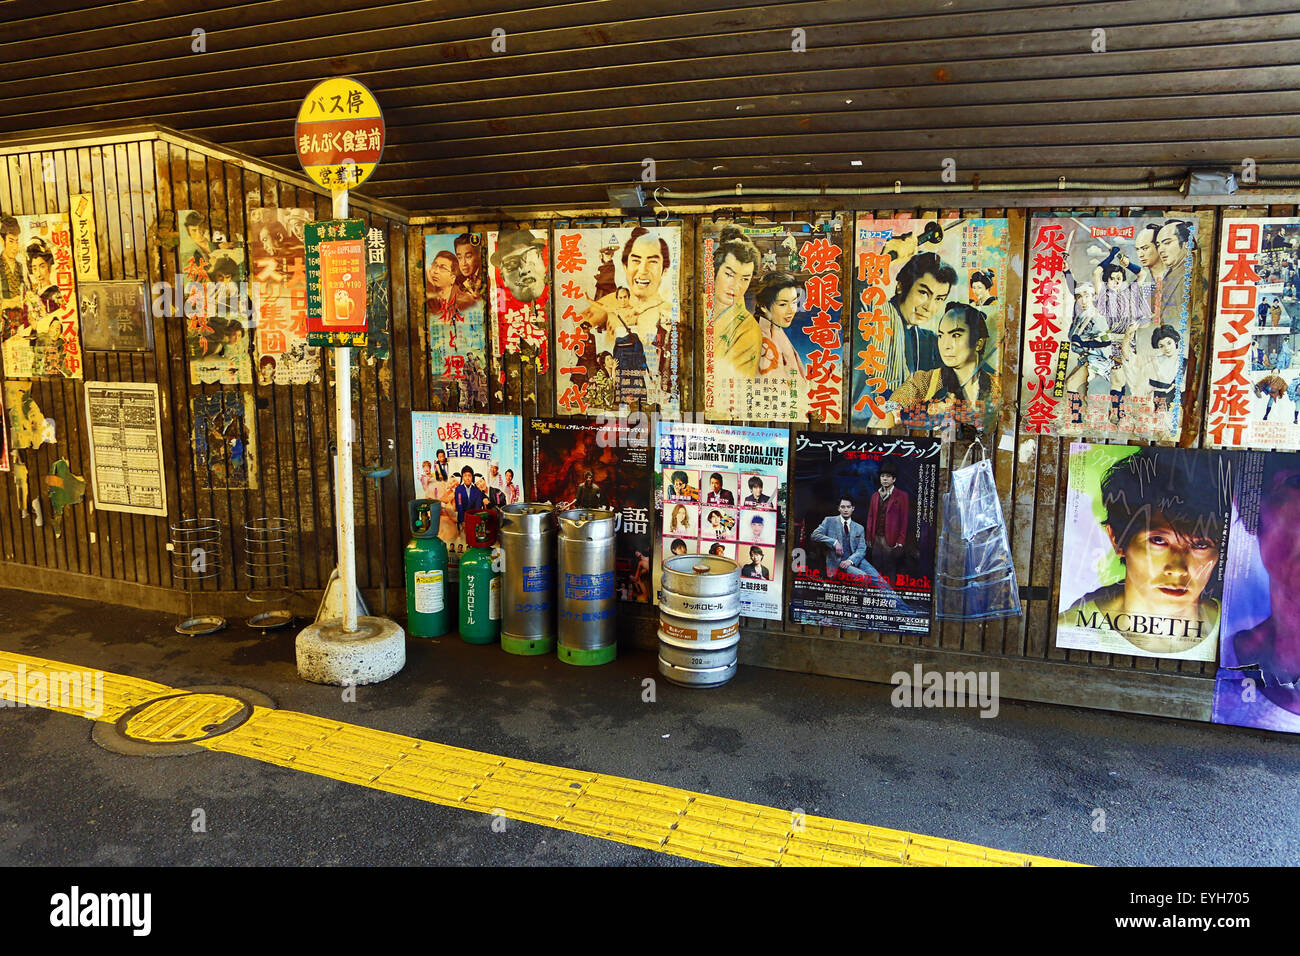 Street scene with movie posters and adverts in Ginza, Tokyo, Japan Stock Photo